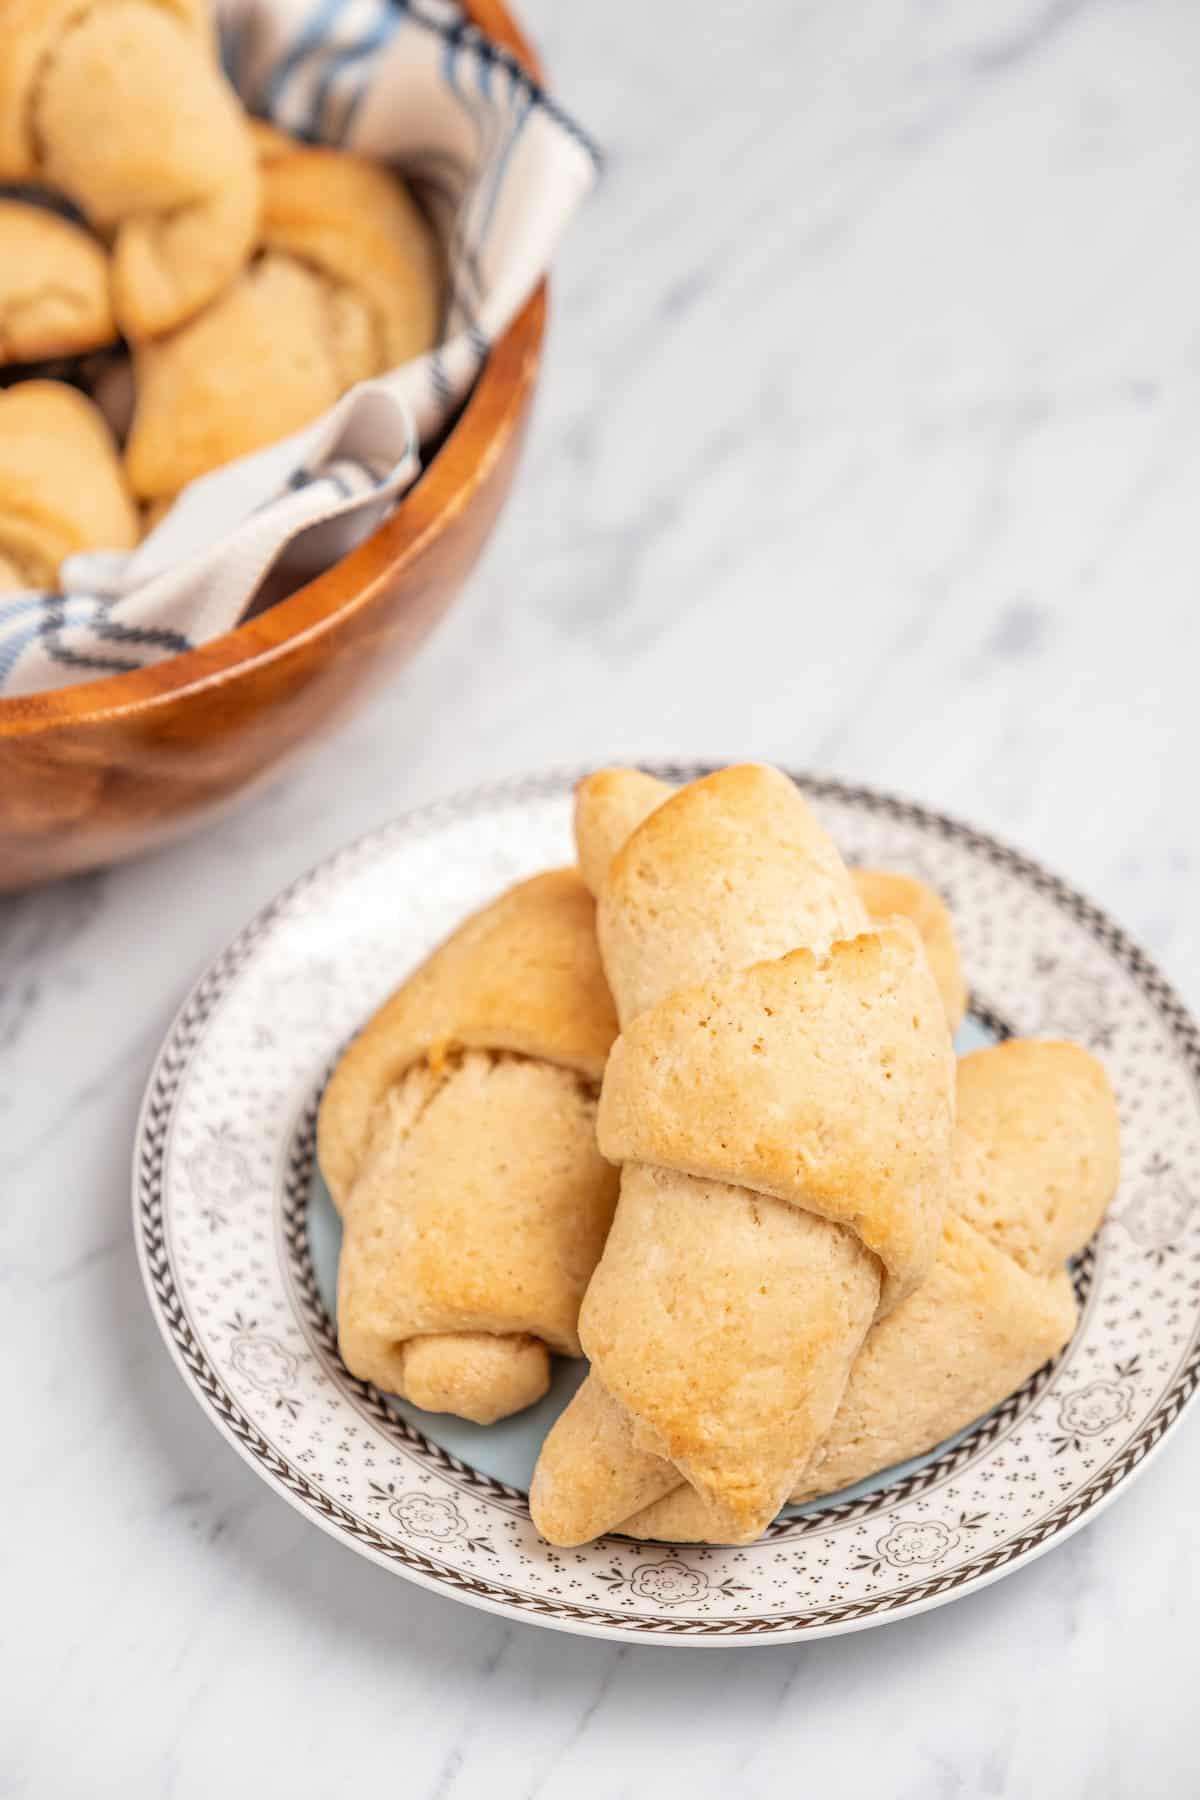 Three crescent rolls on a plate next to a bowl of more rolls.